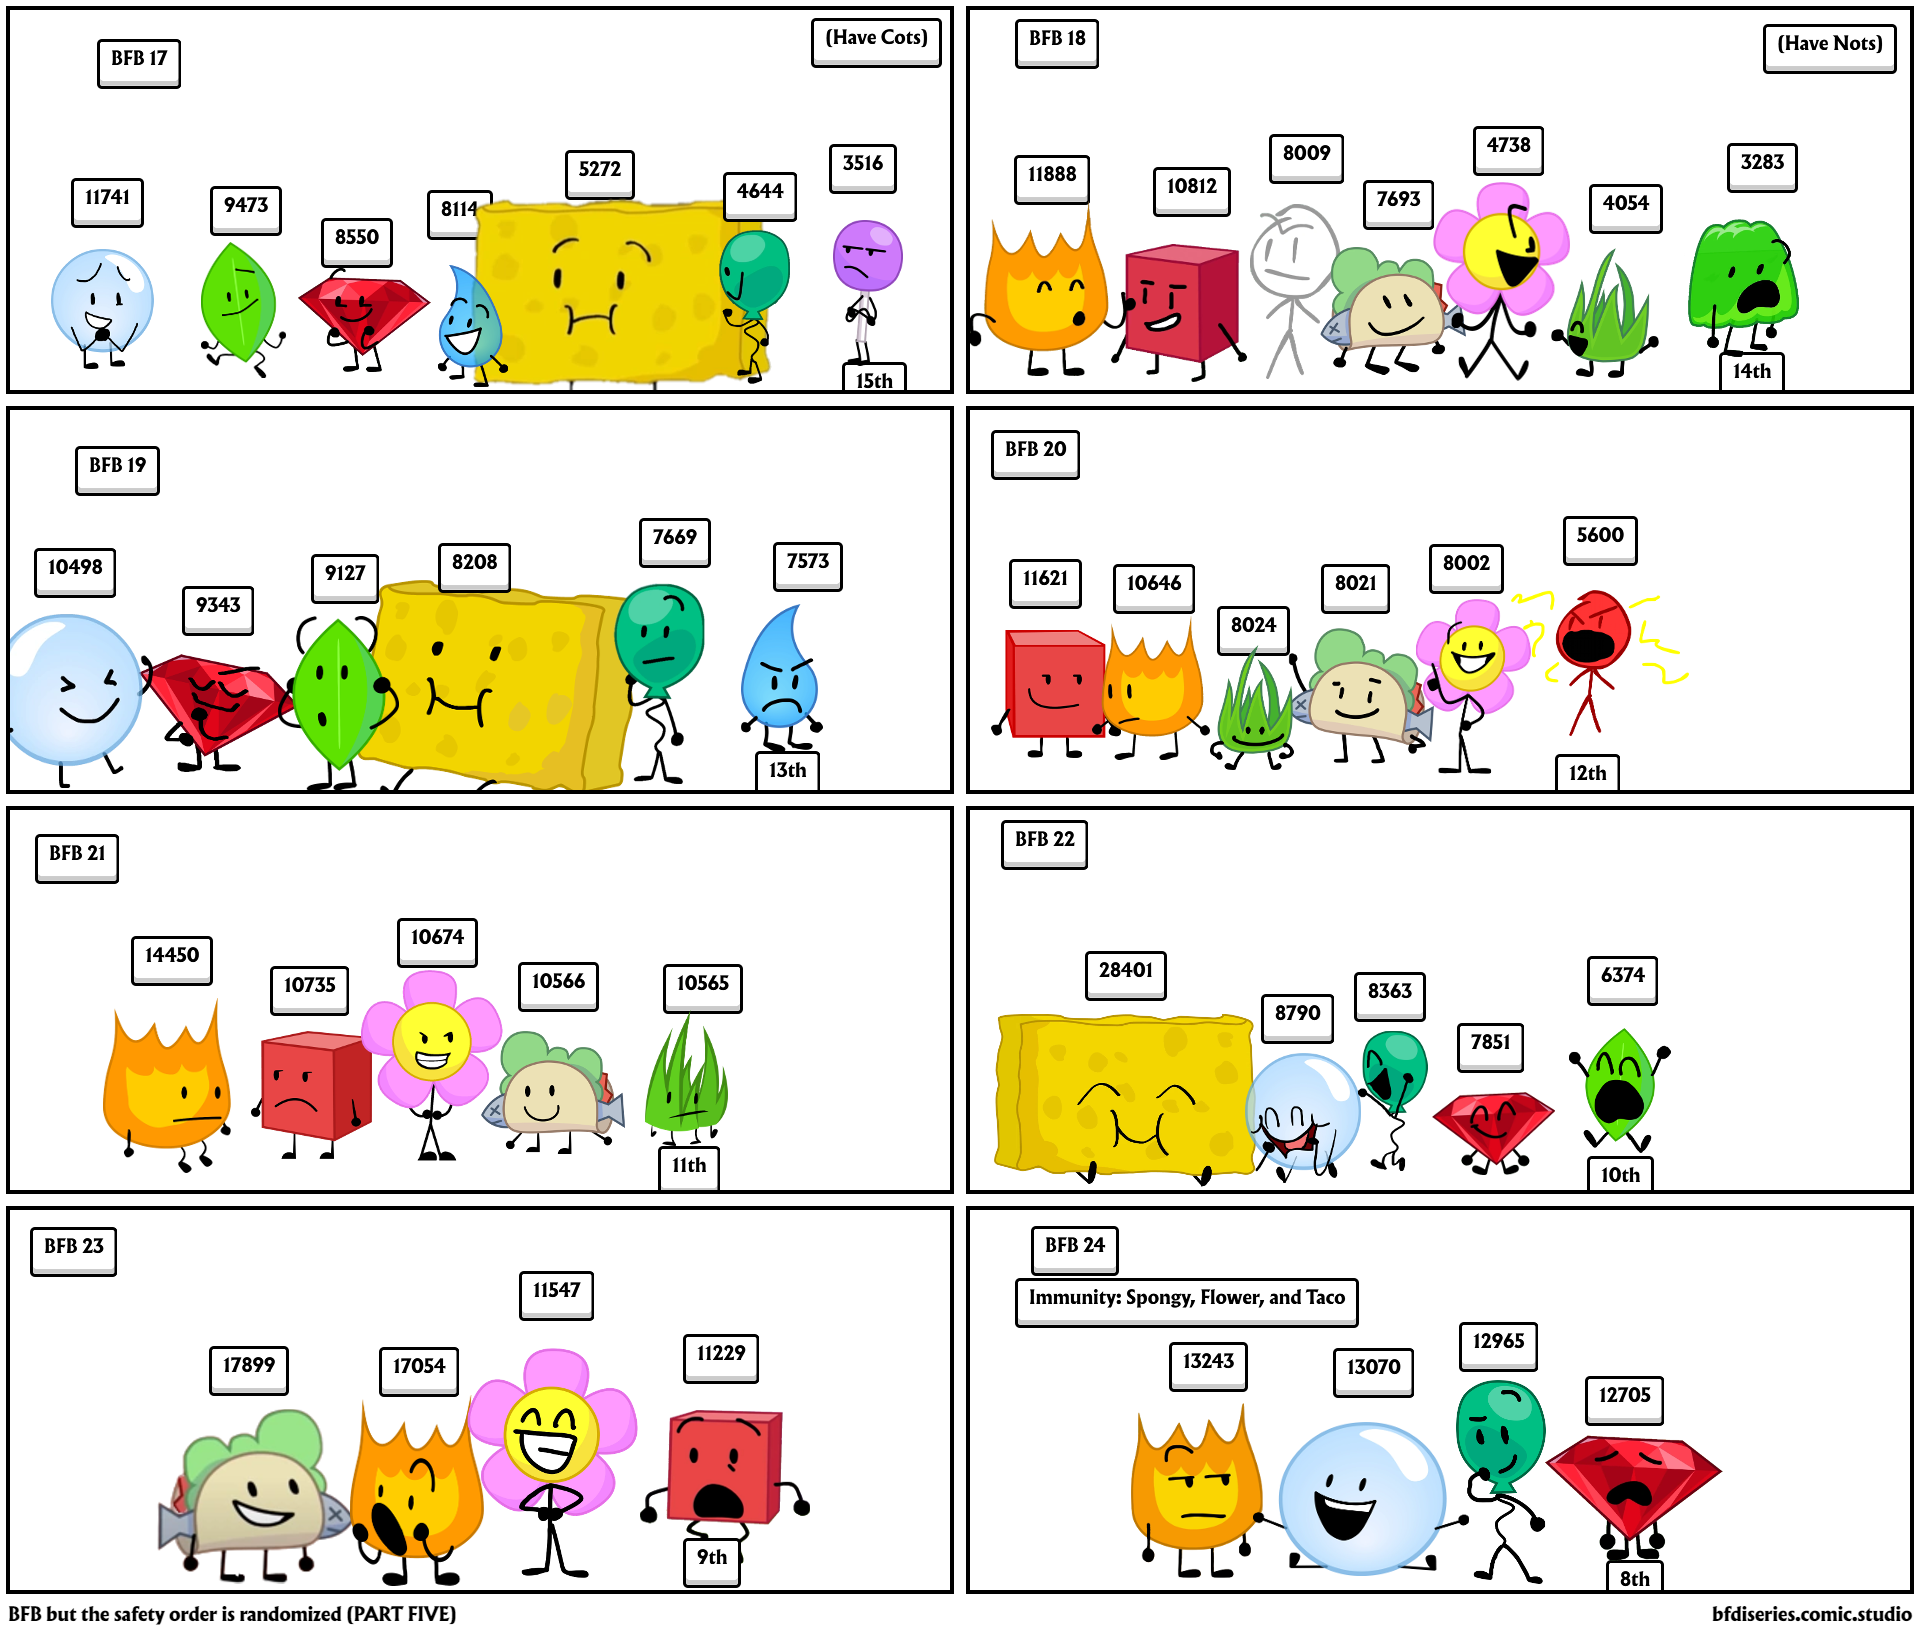 BFB but the safety order is randomized (PART FIVE)